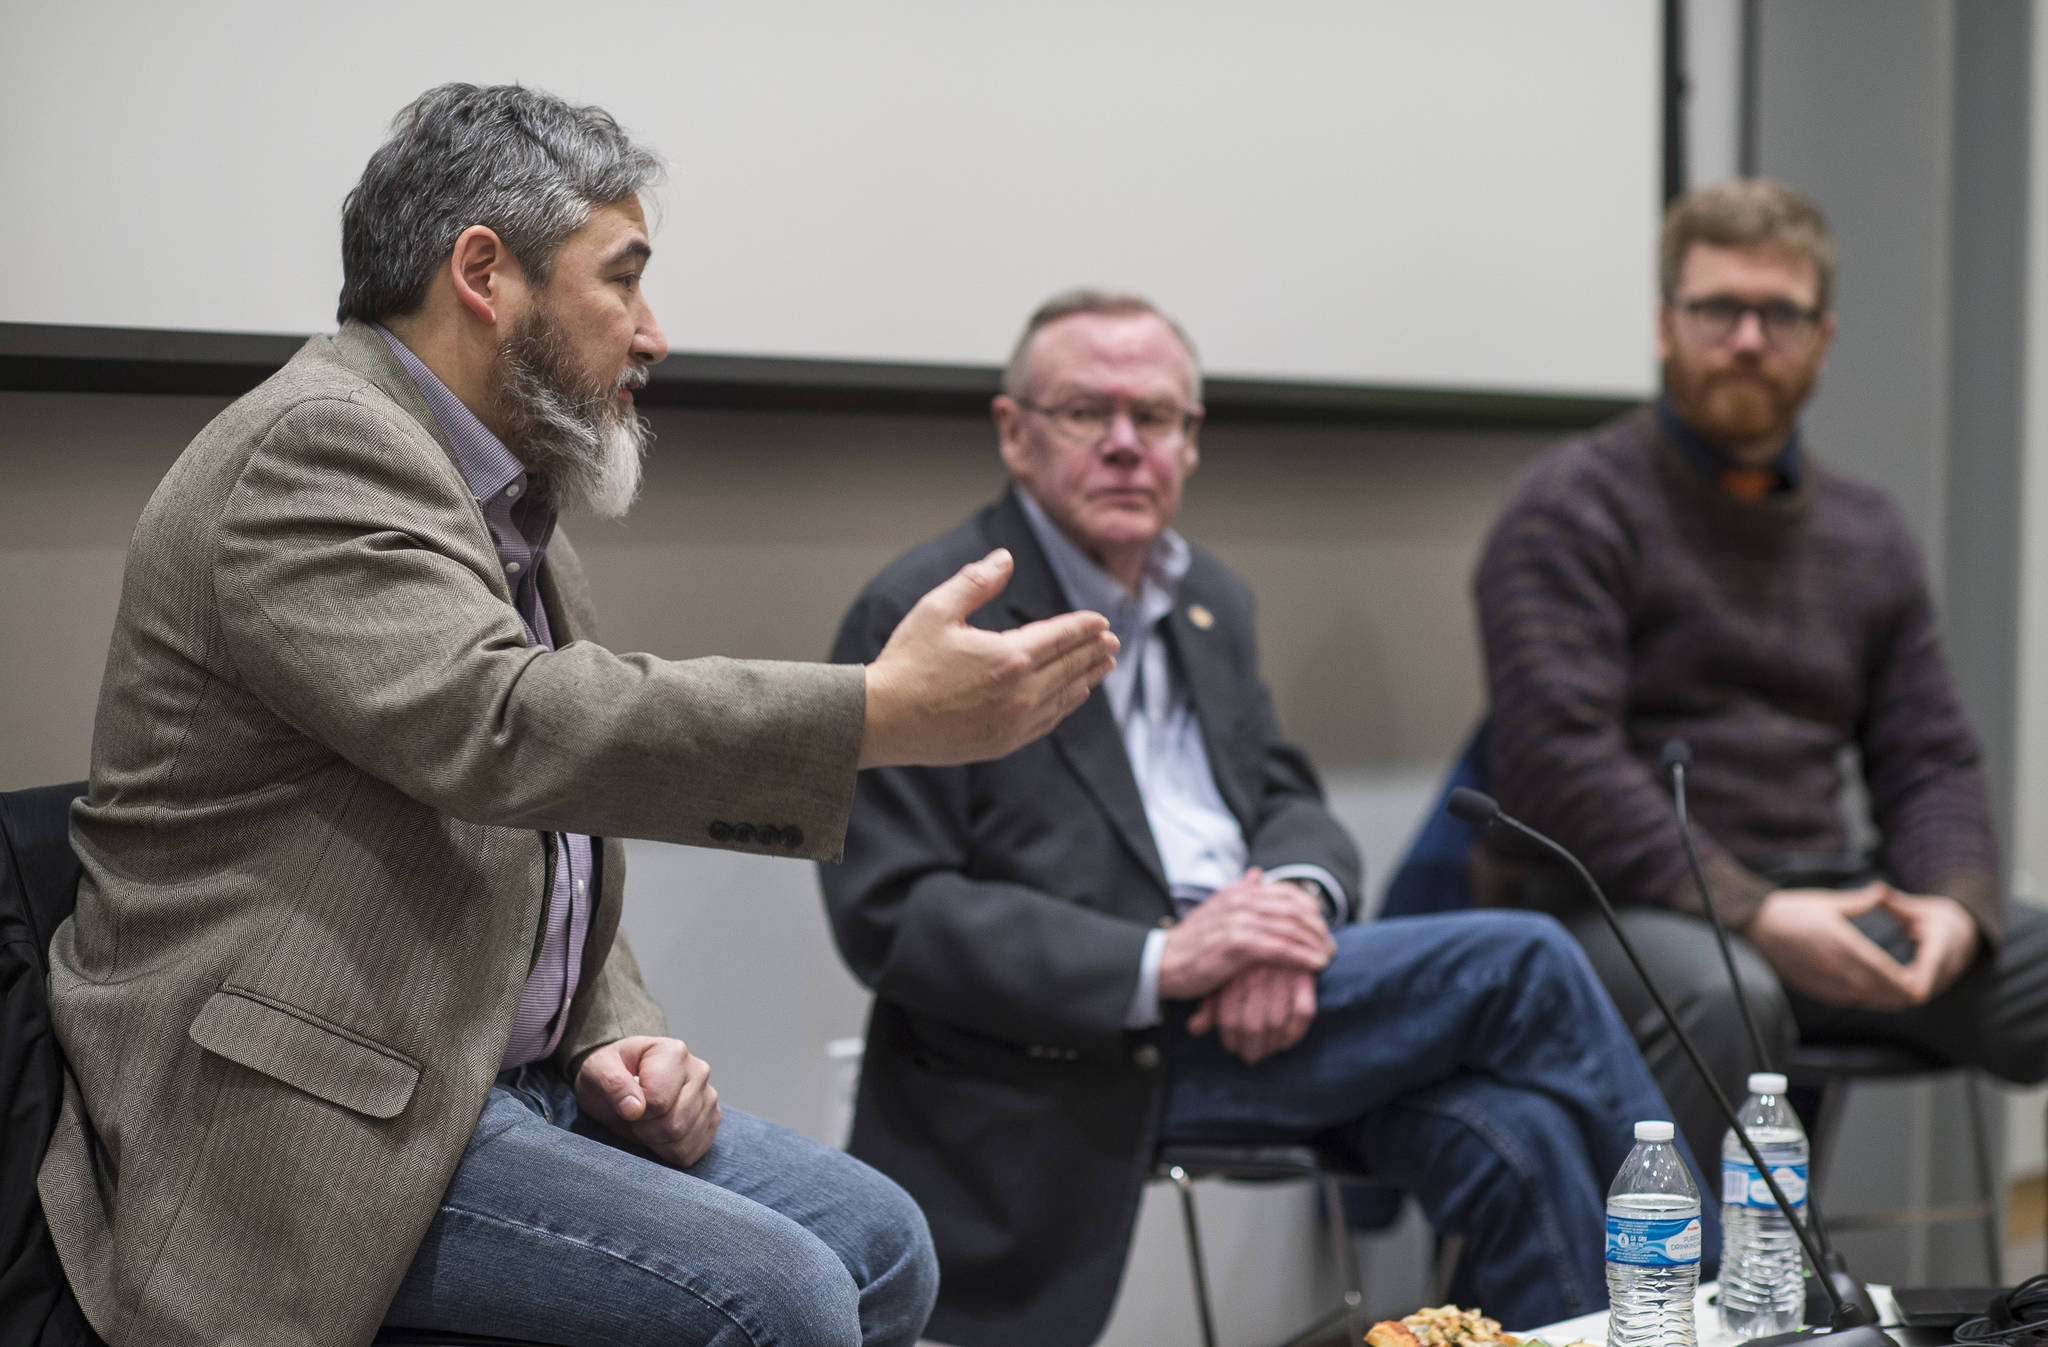 Rep. Sam Kito, D-Juneau, Sen. Dennis Egan, D-Juneau and Rep. Justin Parish, D-Juneau, answer questions from Juneau area residents about legislative priorities during a townhall meeting at the Mendenhall Valley Public Library on Thursday, Jan. 11, 2018. (Michael Penn | Juneau Empire)